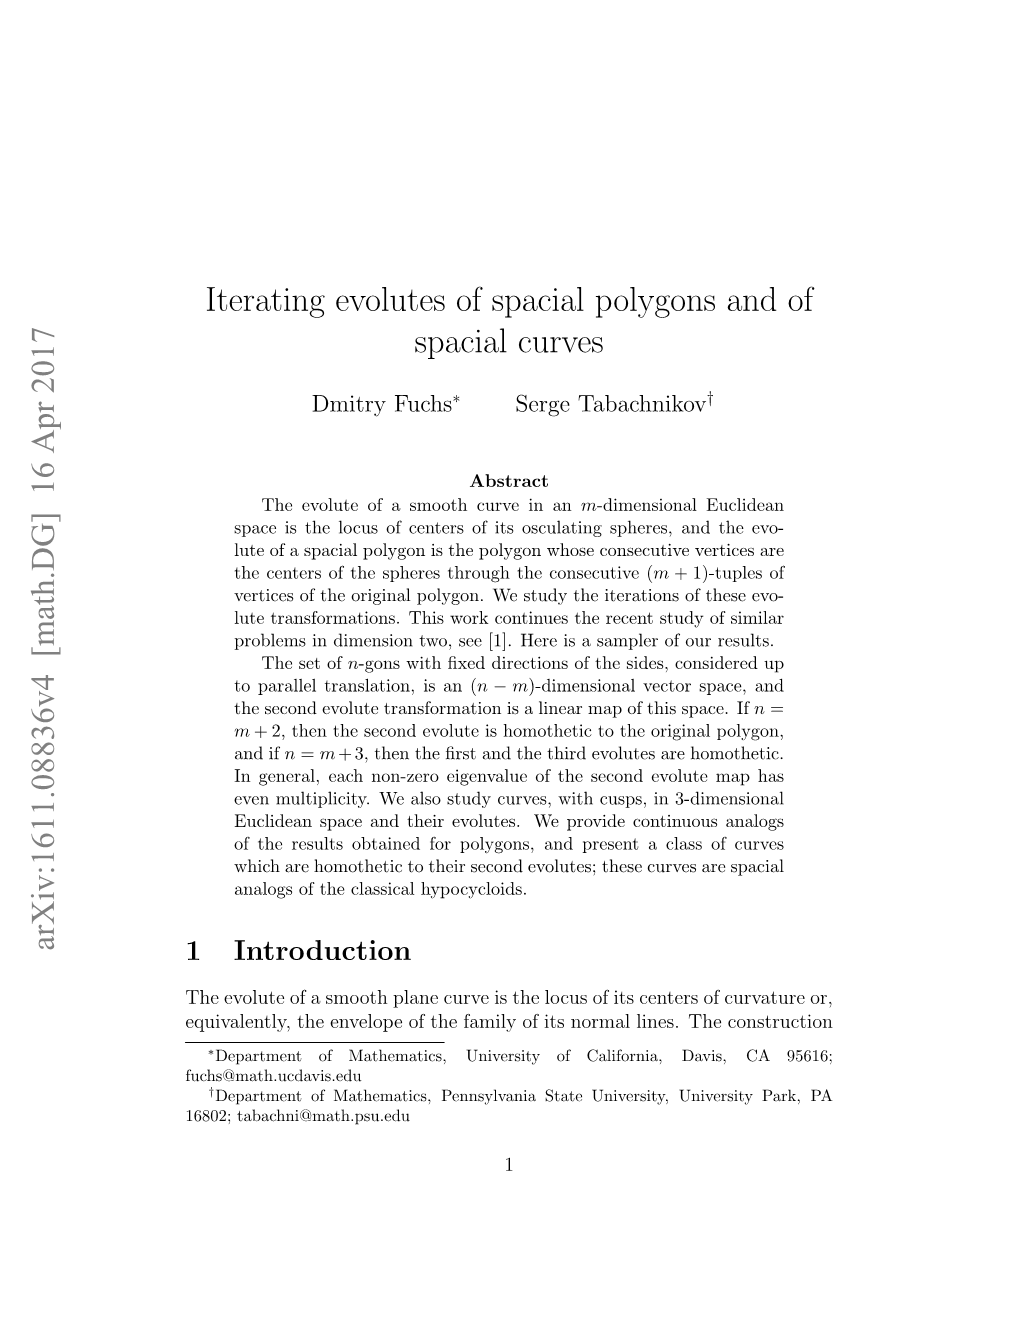 Iterating Evolutes of Spacial Polygons and of Spacial Curves Arxiv